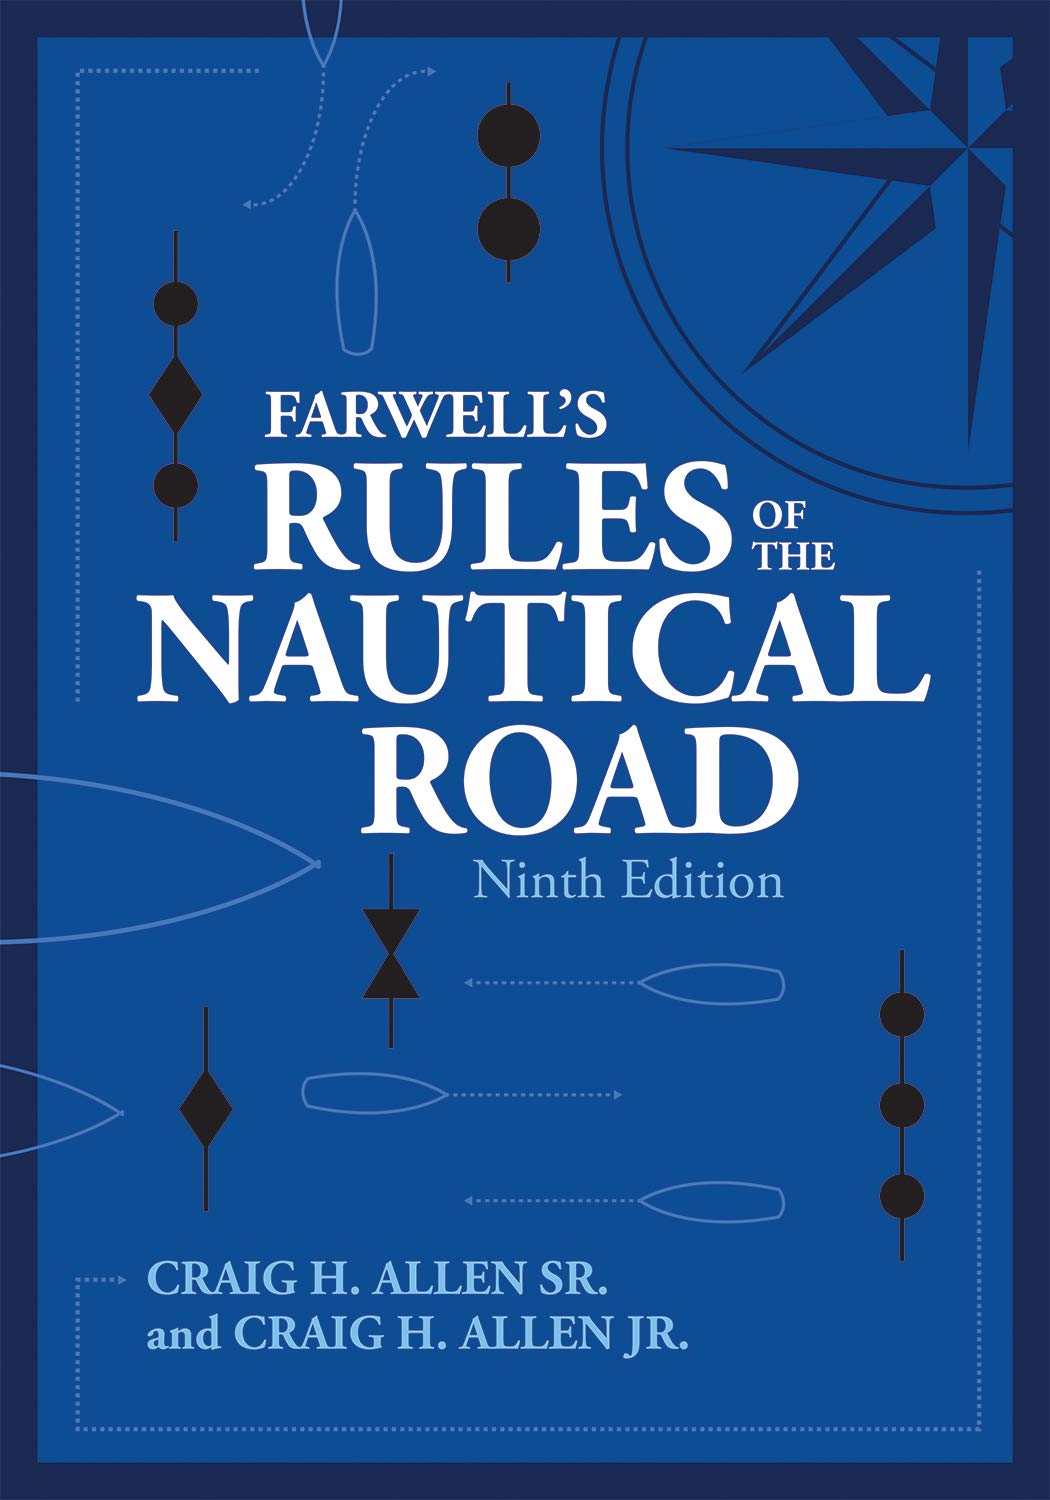 Farwell's Rules of the Nautical Road Ninth Edition (Blue & Gold Professional Library)